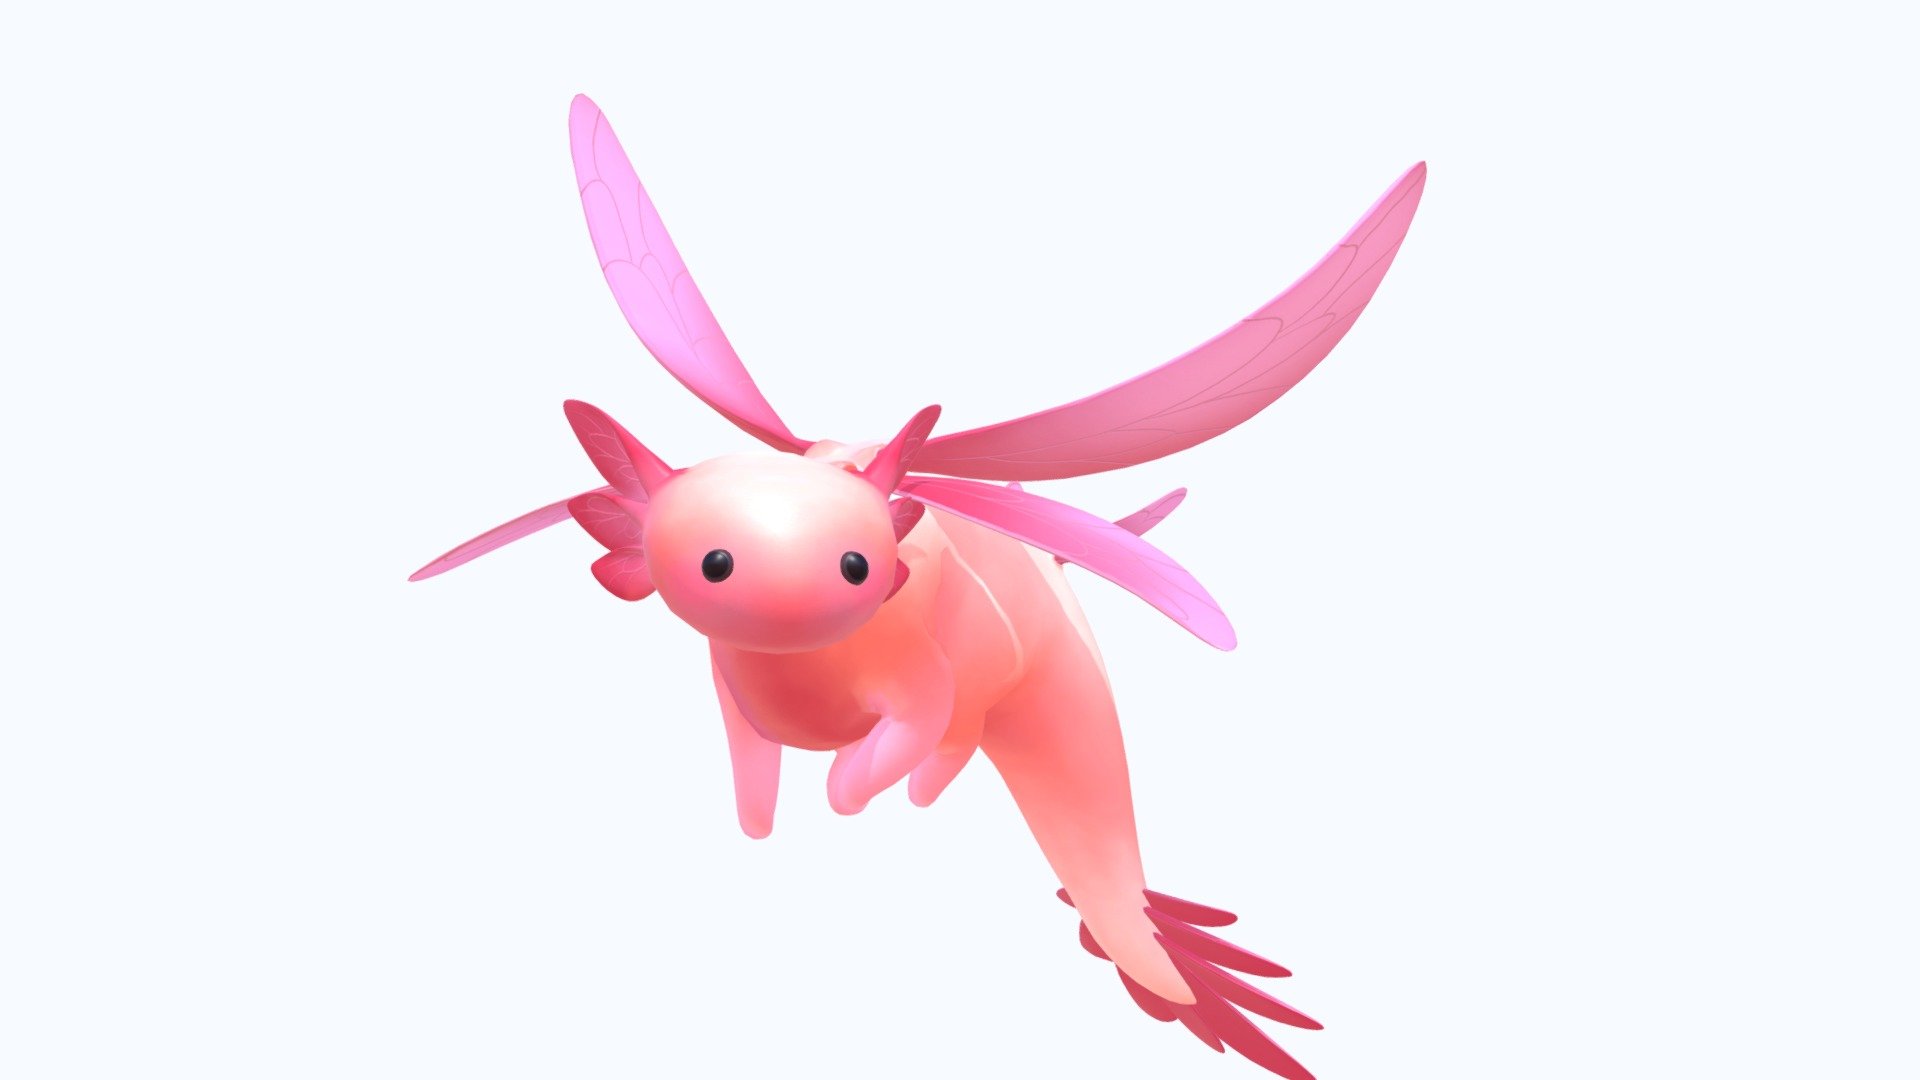 For our fourth assessment in game art year 2 we had to create a character or creature that could be based off an artwork of our own or someone else's. I decided to model a cute creature designed by the artist Ava-riel who you can check out here: https://ava-riel.tumblr.com/post/176692707832
We also had to animate them, i gathered lots of inspiration from bees, hummingbirds and dragonfly's that i tried to work into the creature 3d model